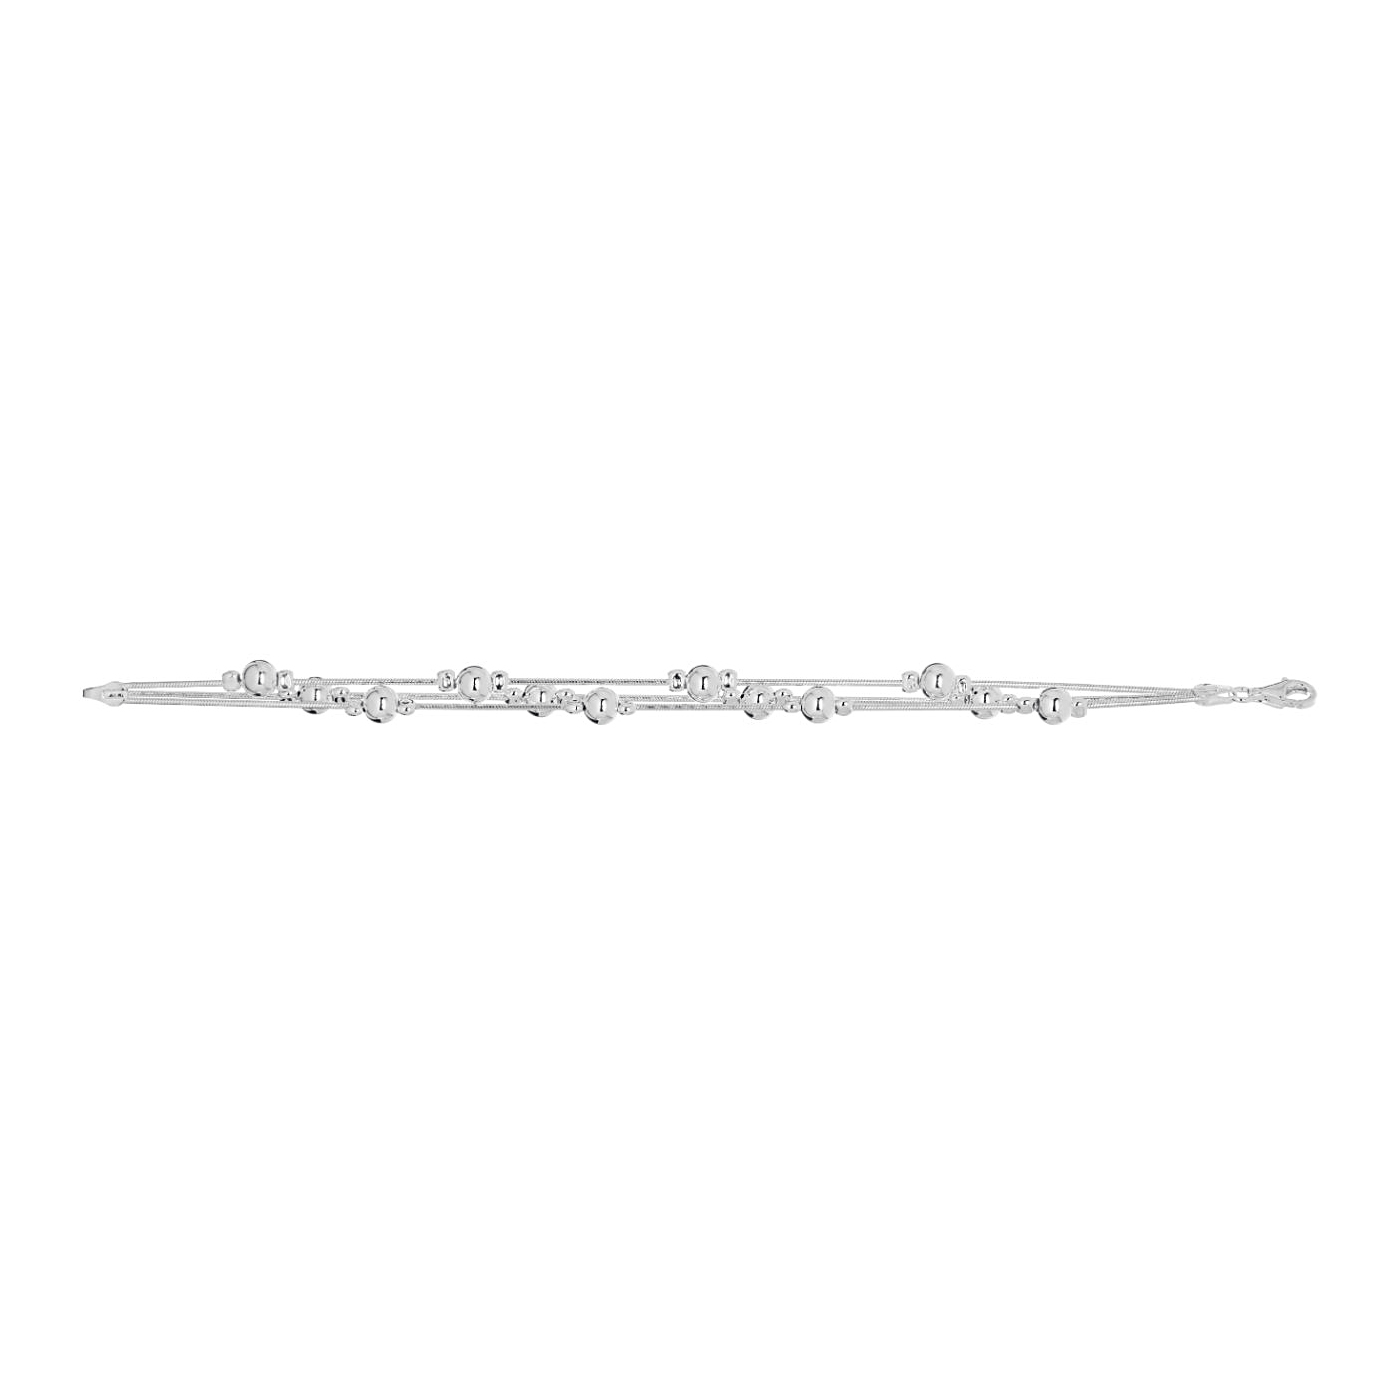 Sterling Silver 3-Strand Bead Bracelet Measuring 7.5 Inches